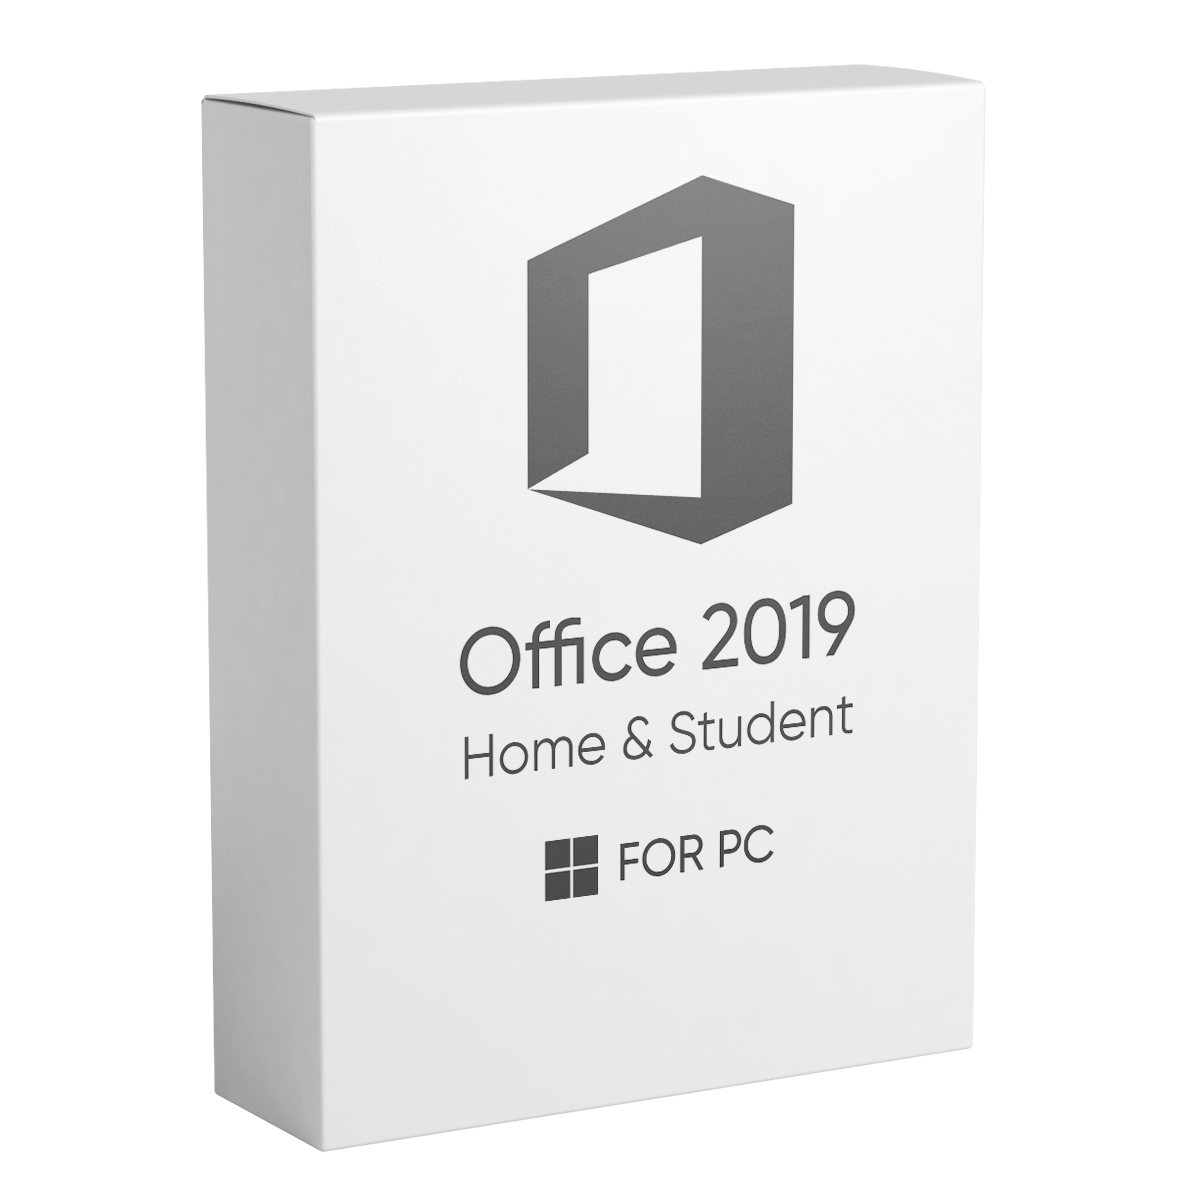 Office 2019 Home and Student for PC - Lifetime License